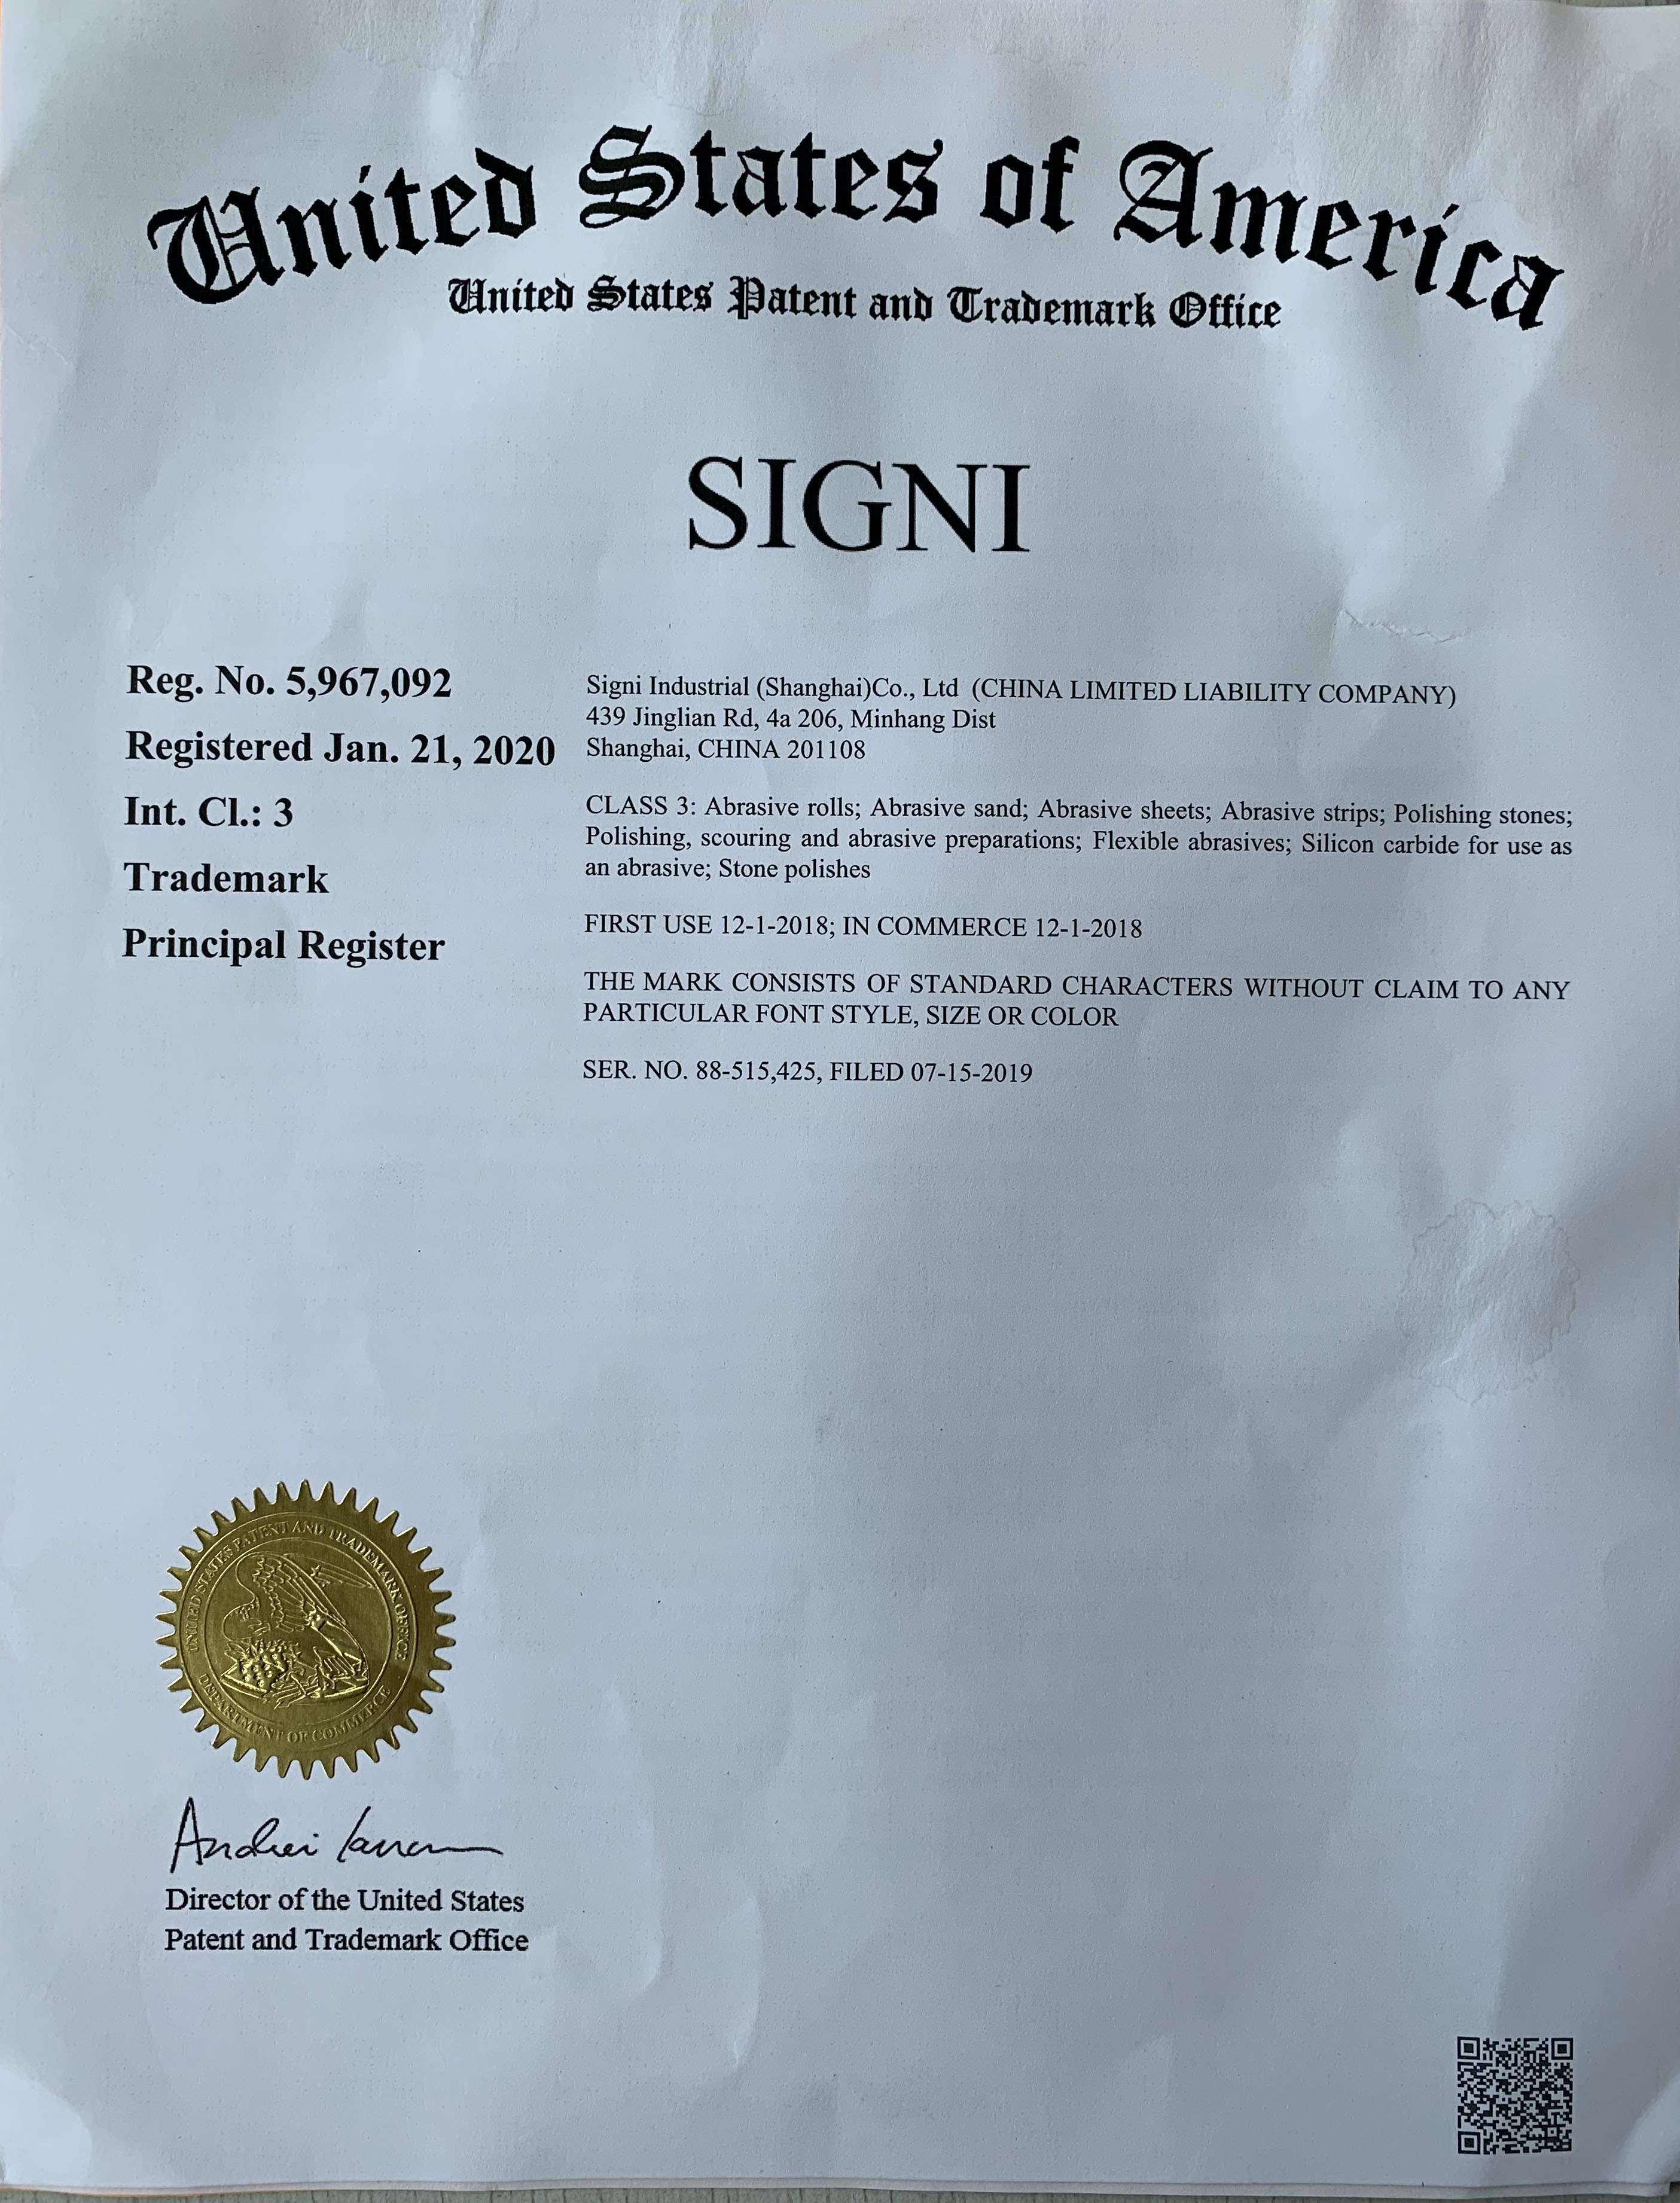 China SIGNI INDUSTRIAL (SHANGHAI) CO., LTD Certification